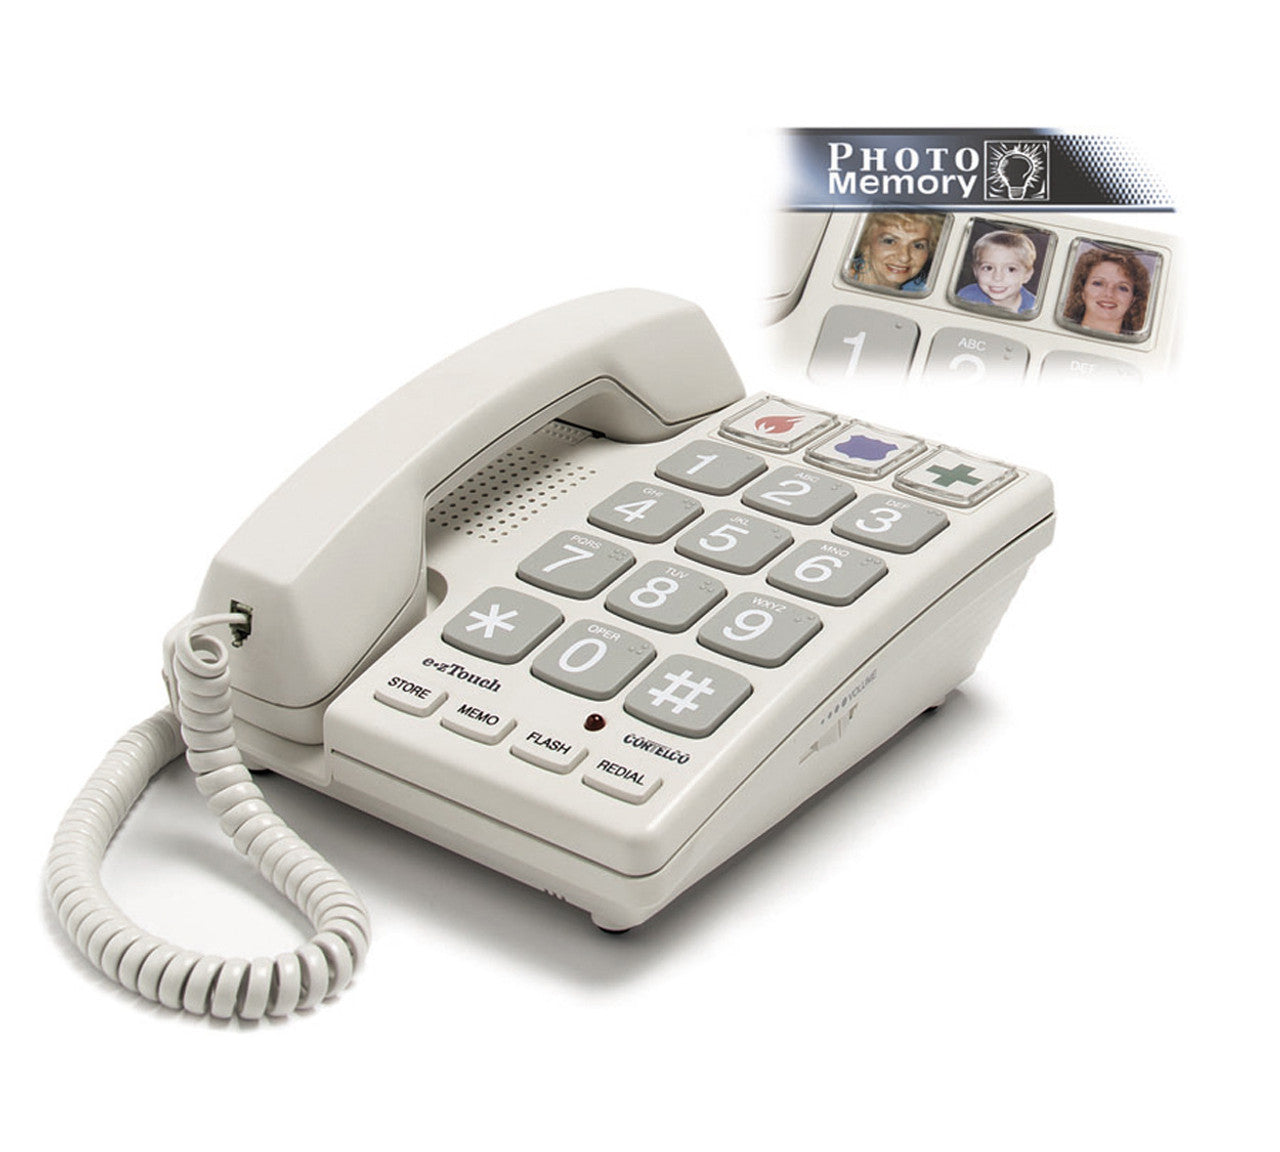 Large Button Brailled corded landline phone with gray buttons and large white numbers.